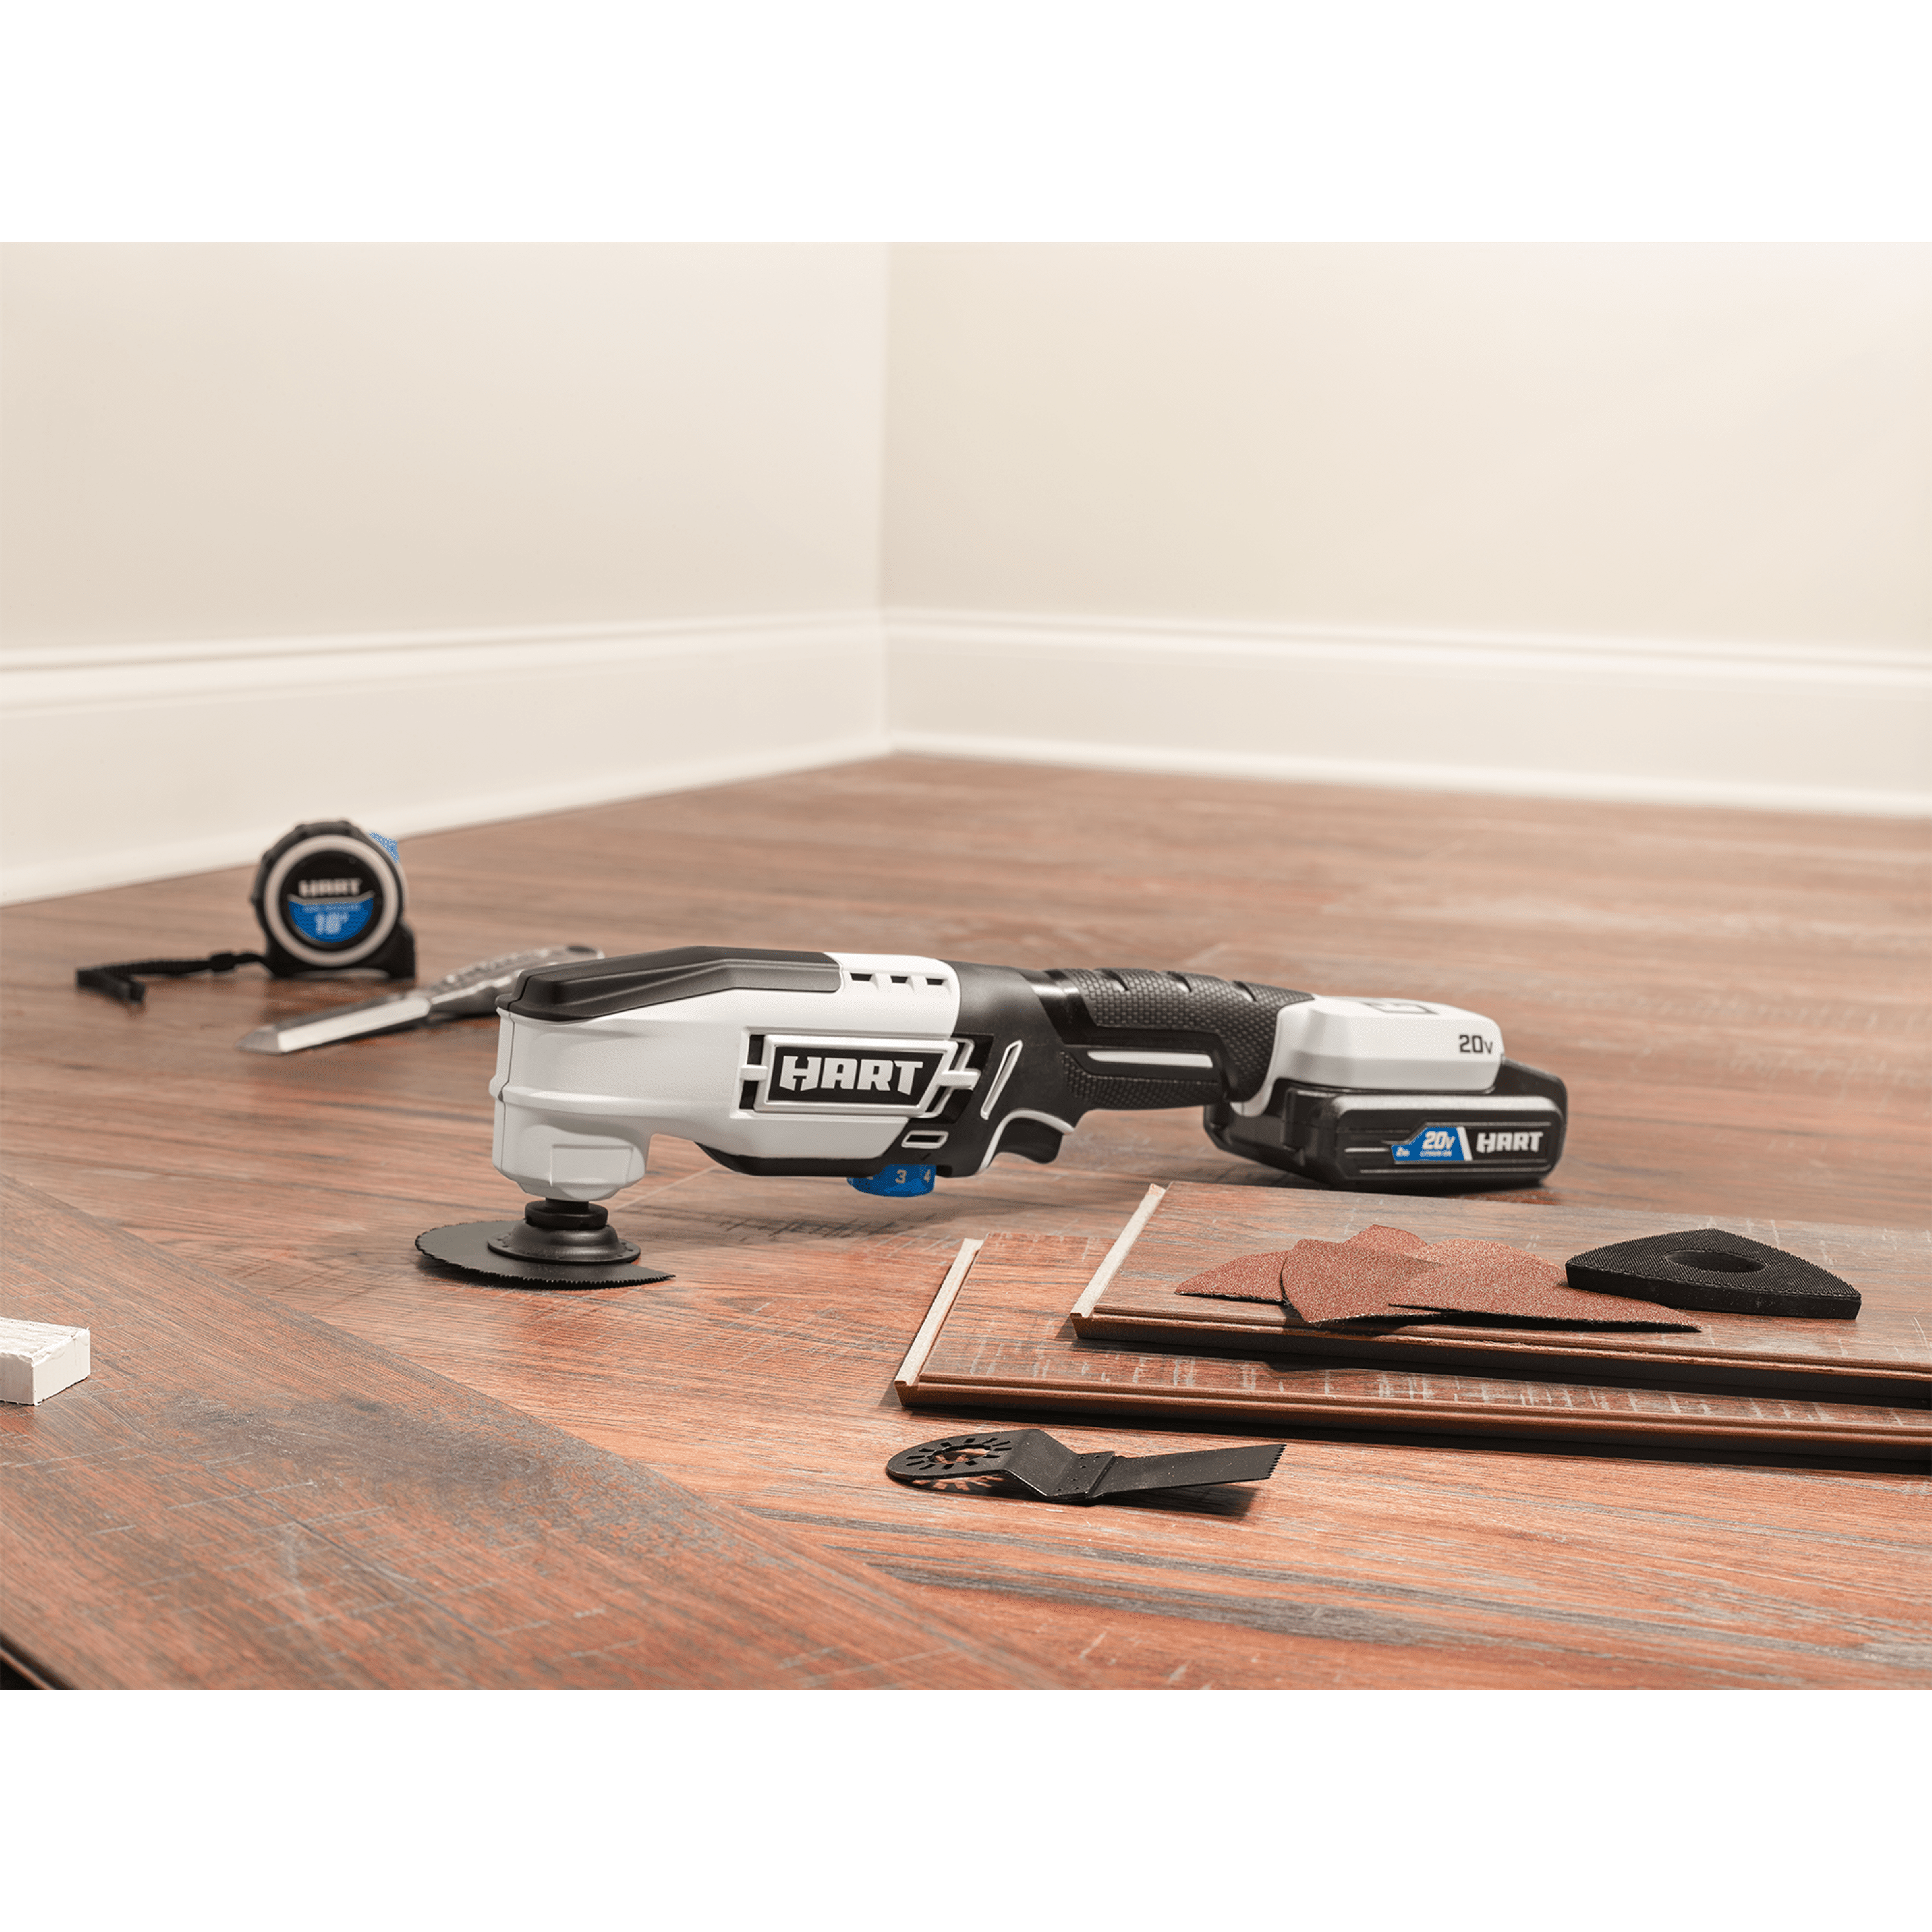 HART 20-Volt Cordless Oscillating Multi-Tool with Accessories (Battery Not Included)